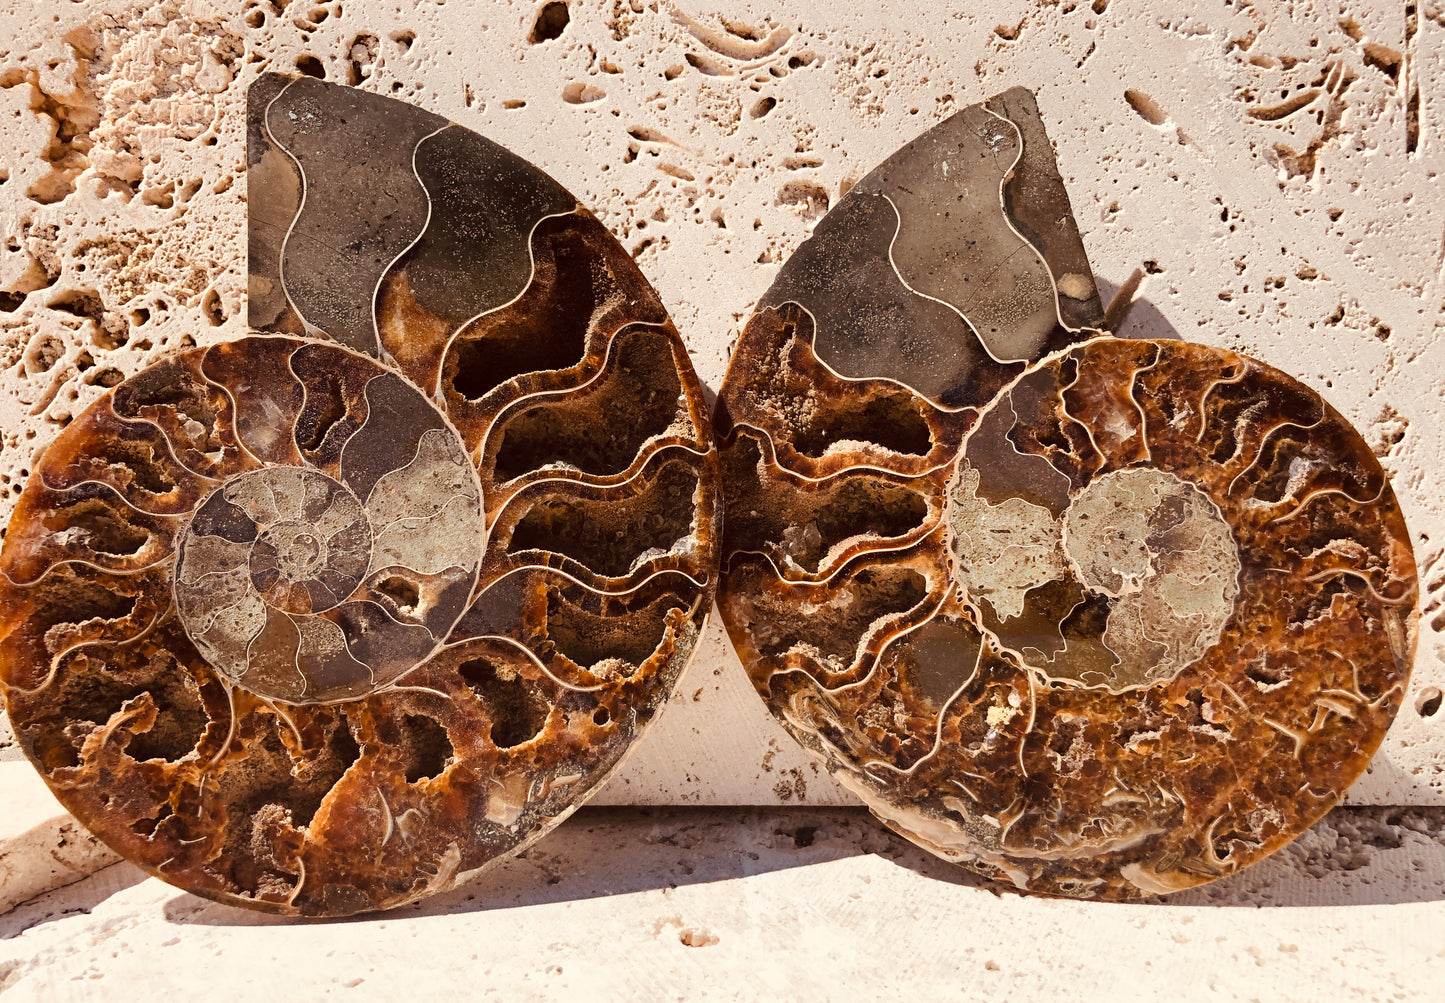 Larger Ammonite Fossilized Slices with Druzy